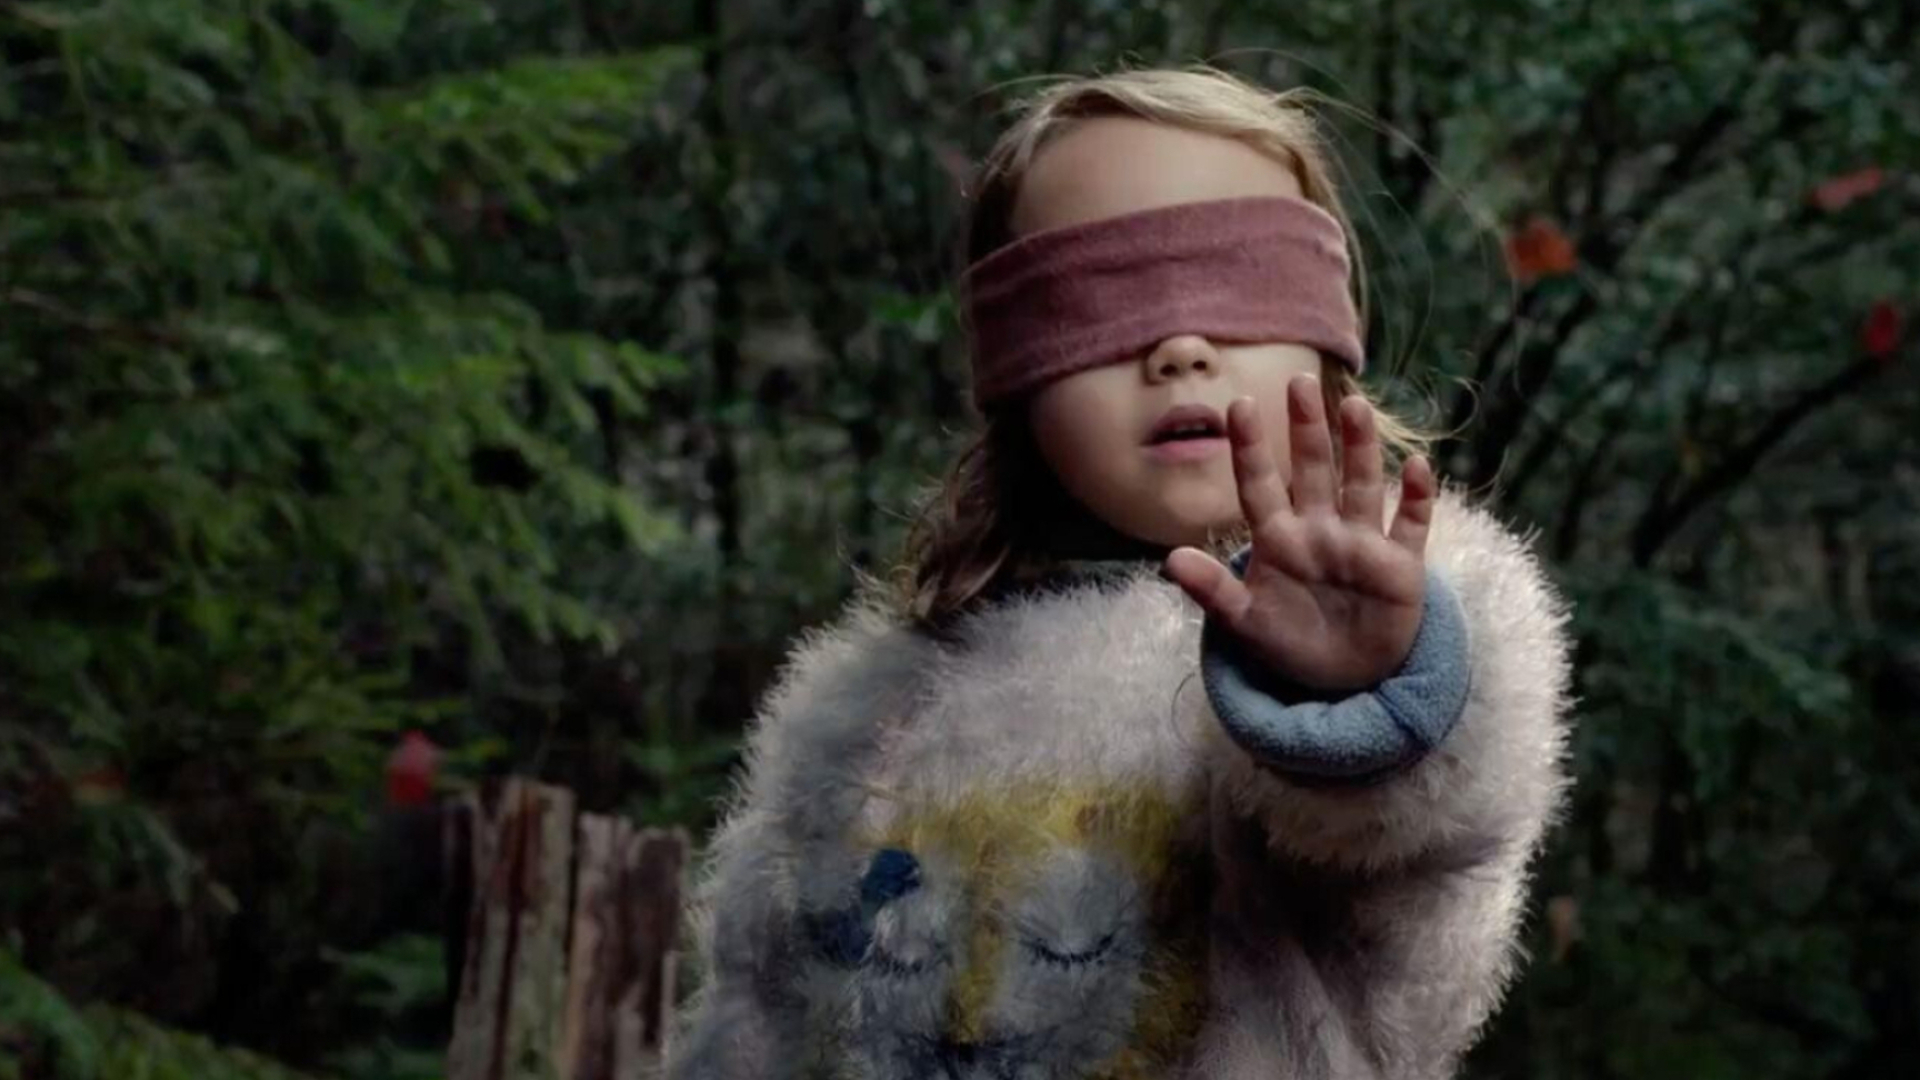 Bird Box (Movie 2018): Vivien Lyra Blair as Girl and young Olympia, One of the leading child-characters. 1920x1080 Full HD Background.